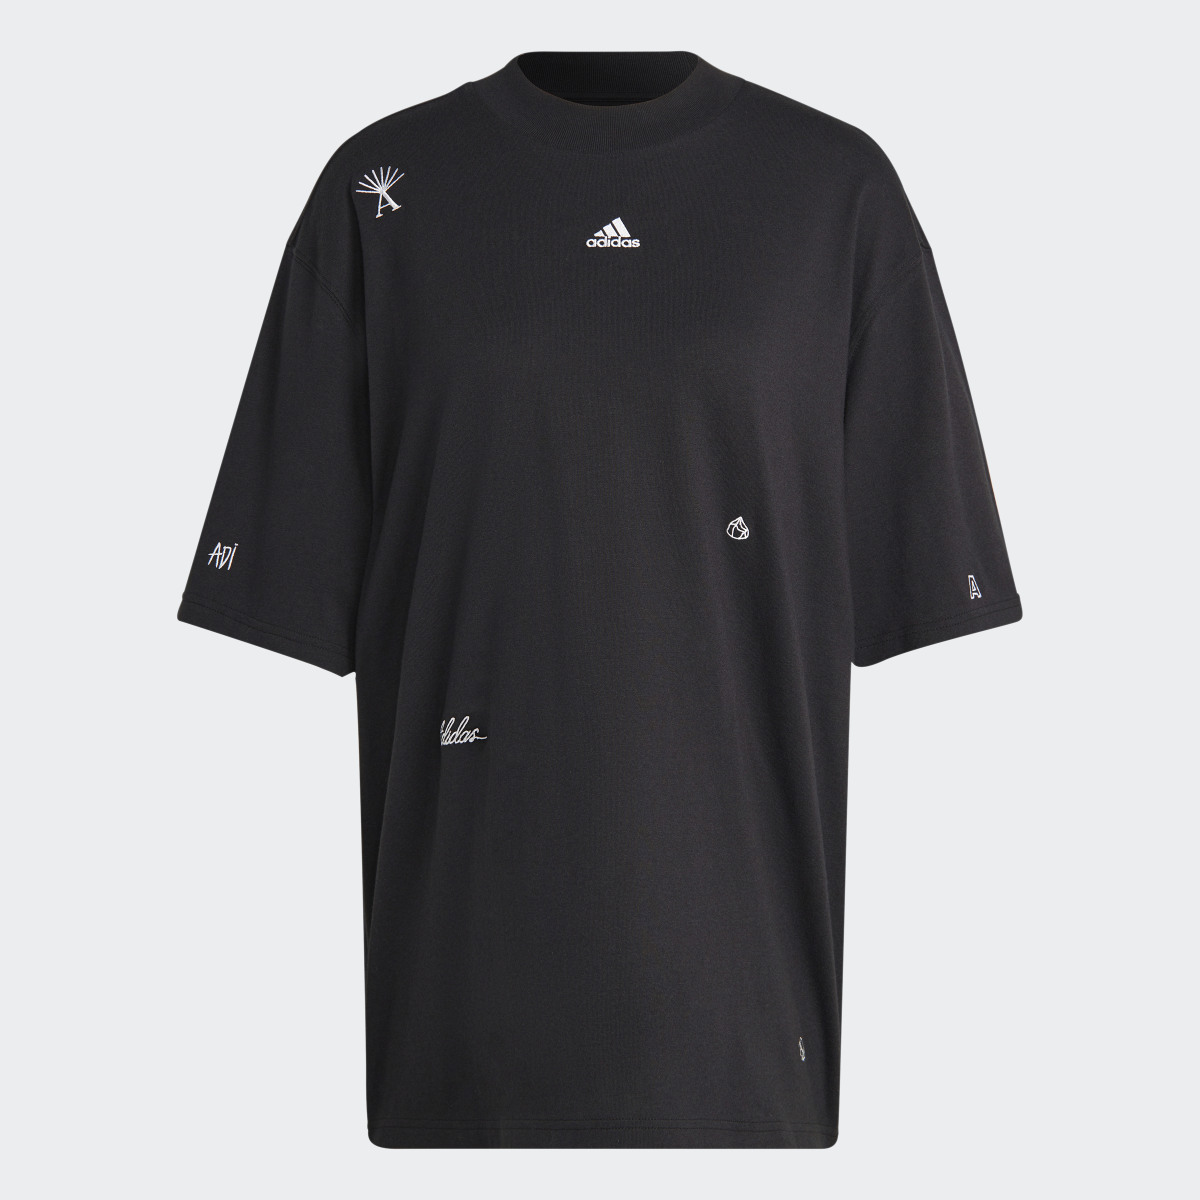 Adidas Boyfriend T-Shirt with Healing Crystals Inspired Graphics. 6